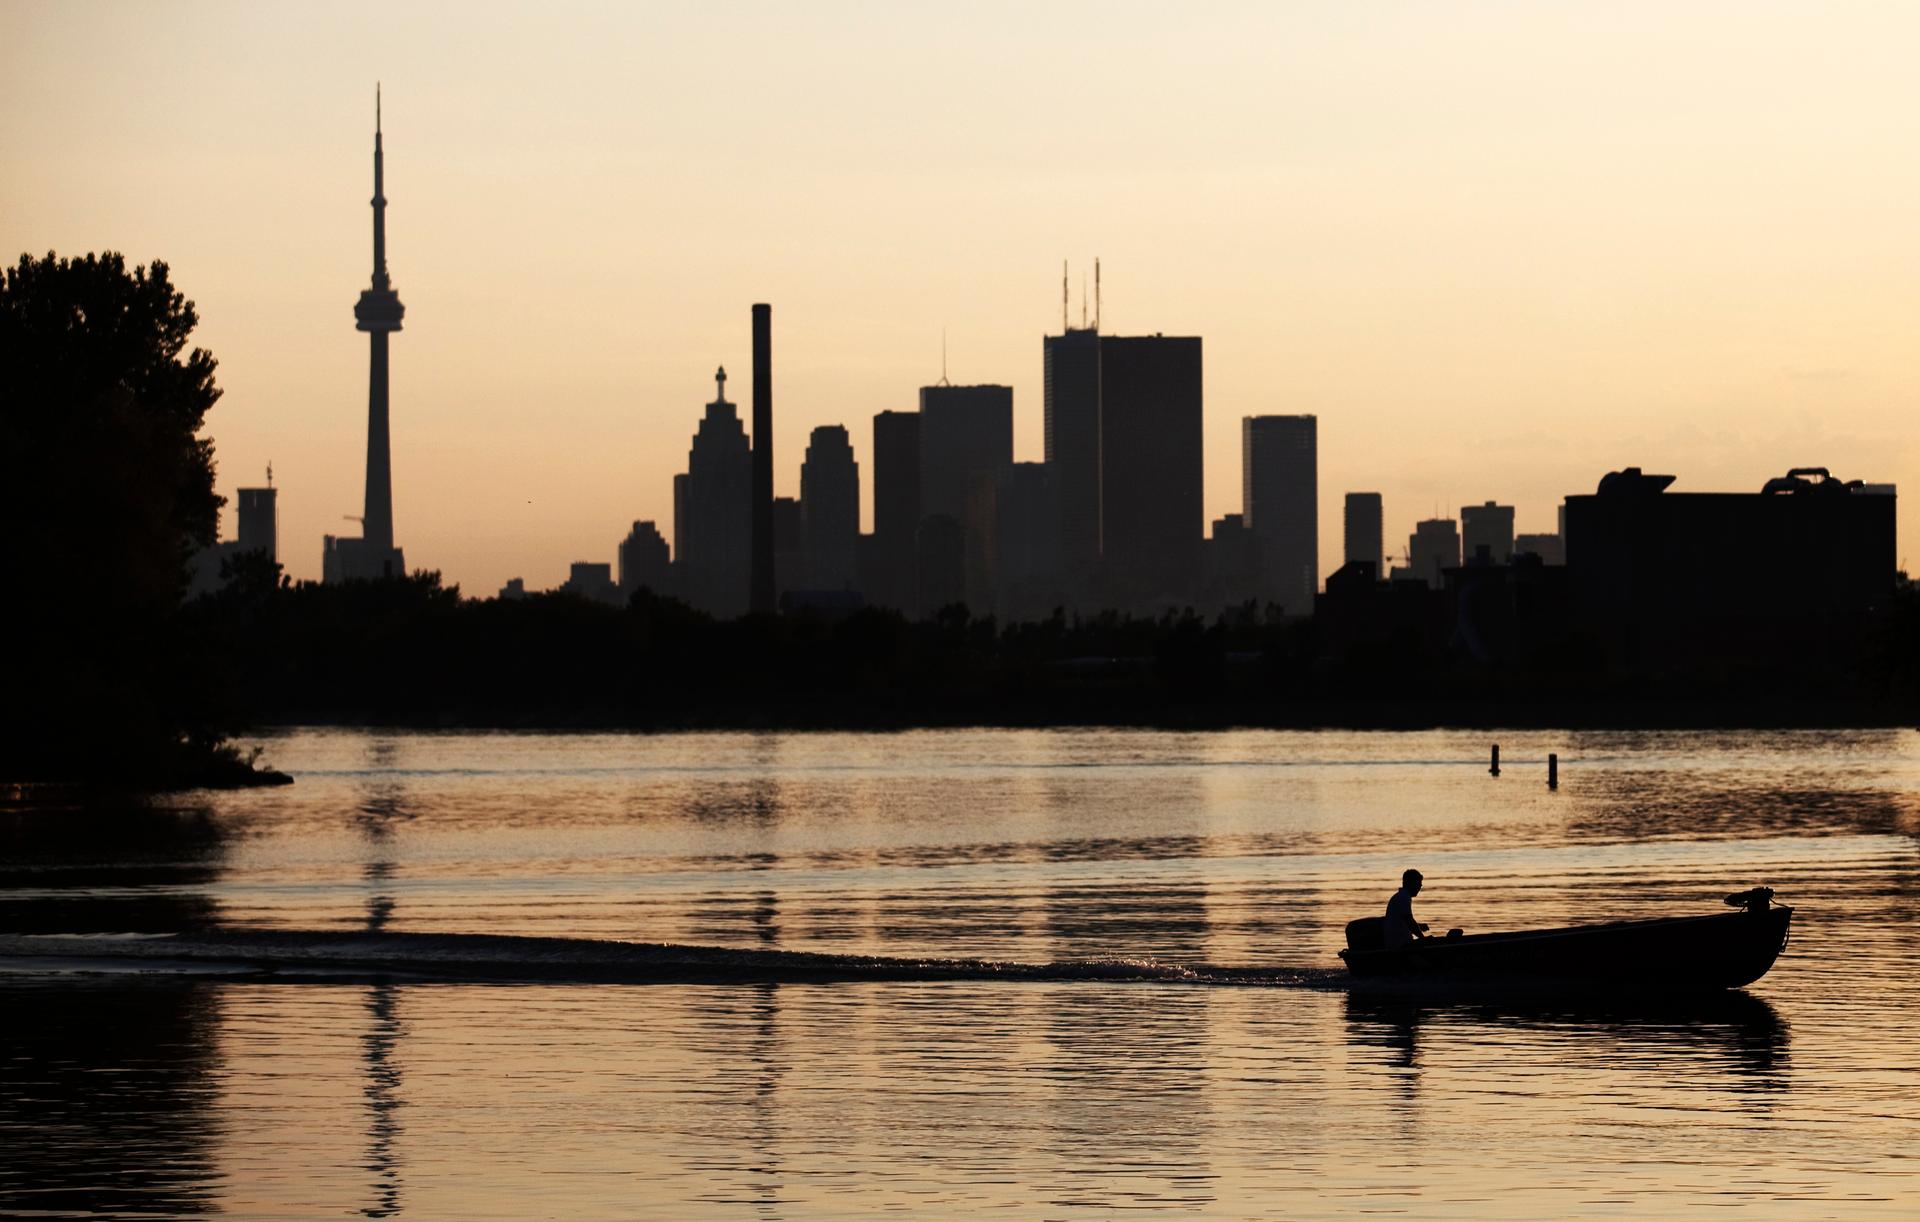 A boat passes through in front of the Toronto skyline during sunset at Ashbridge's Bay Park.